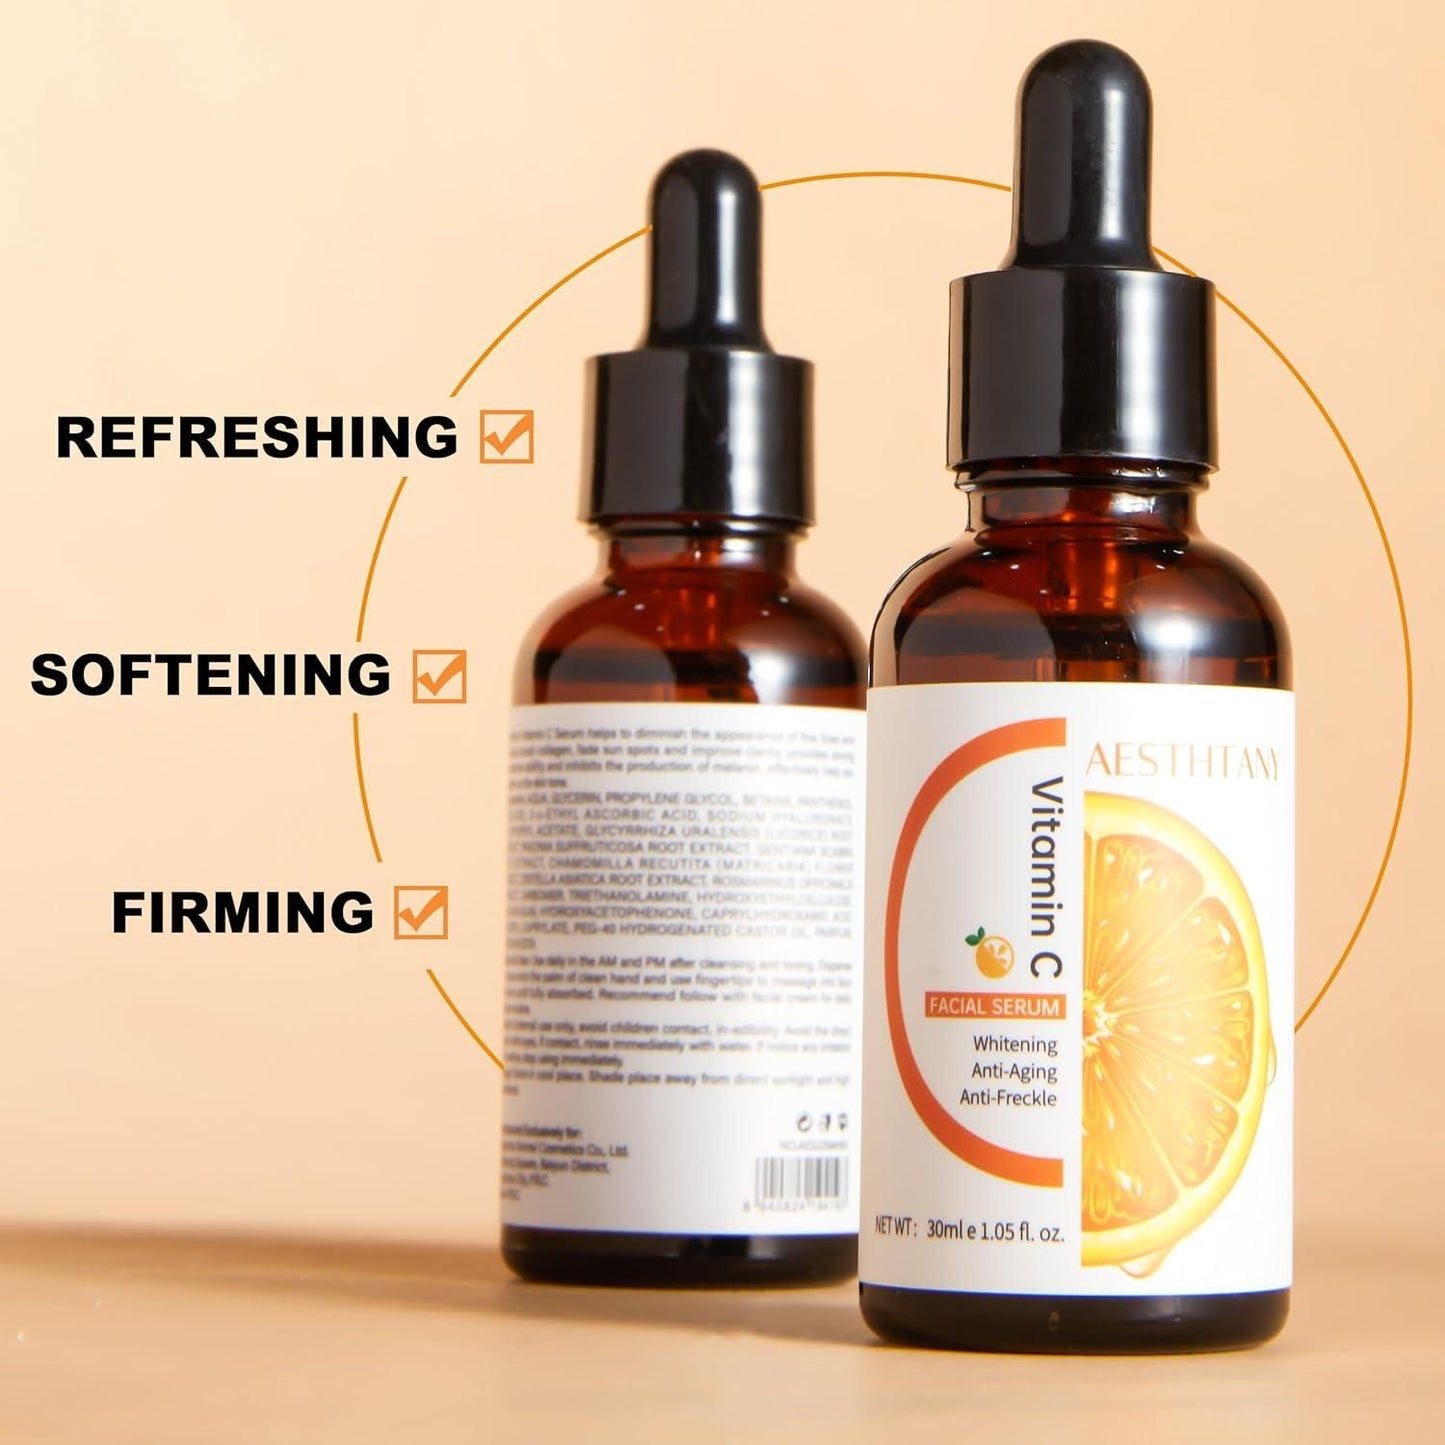 Hydrating Hyaluronic Acid Serum for Face with Vitamin C, Vitamin E